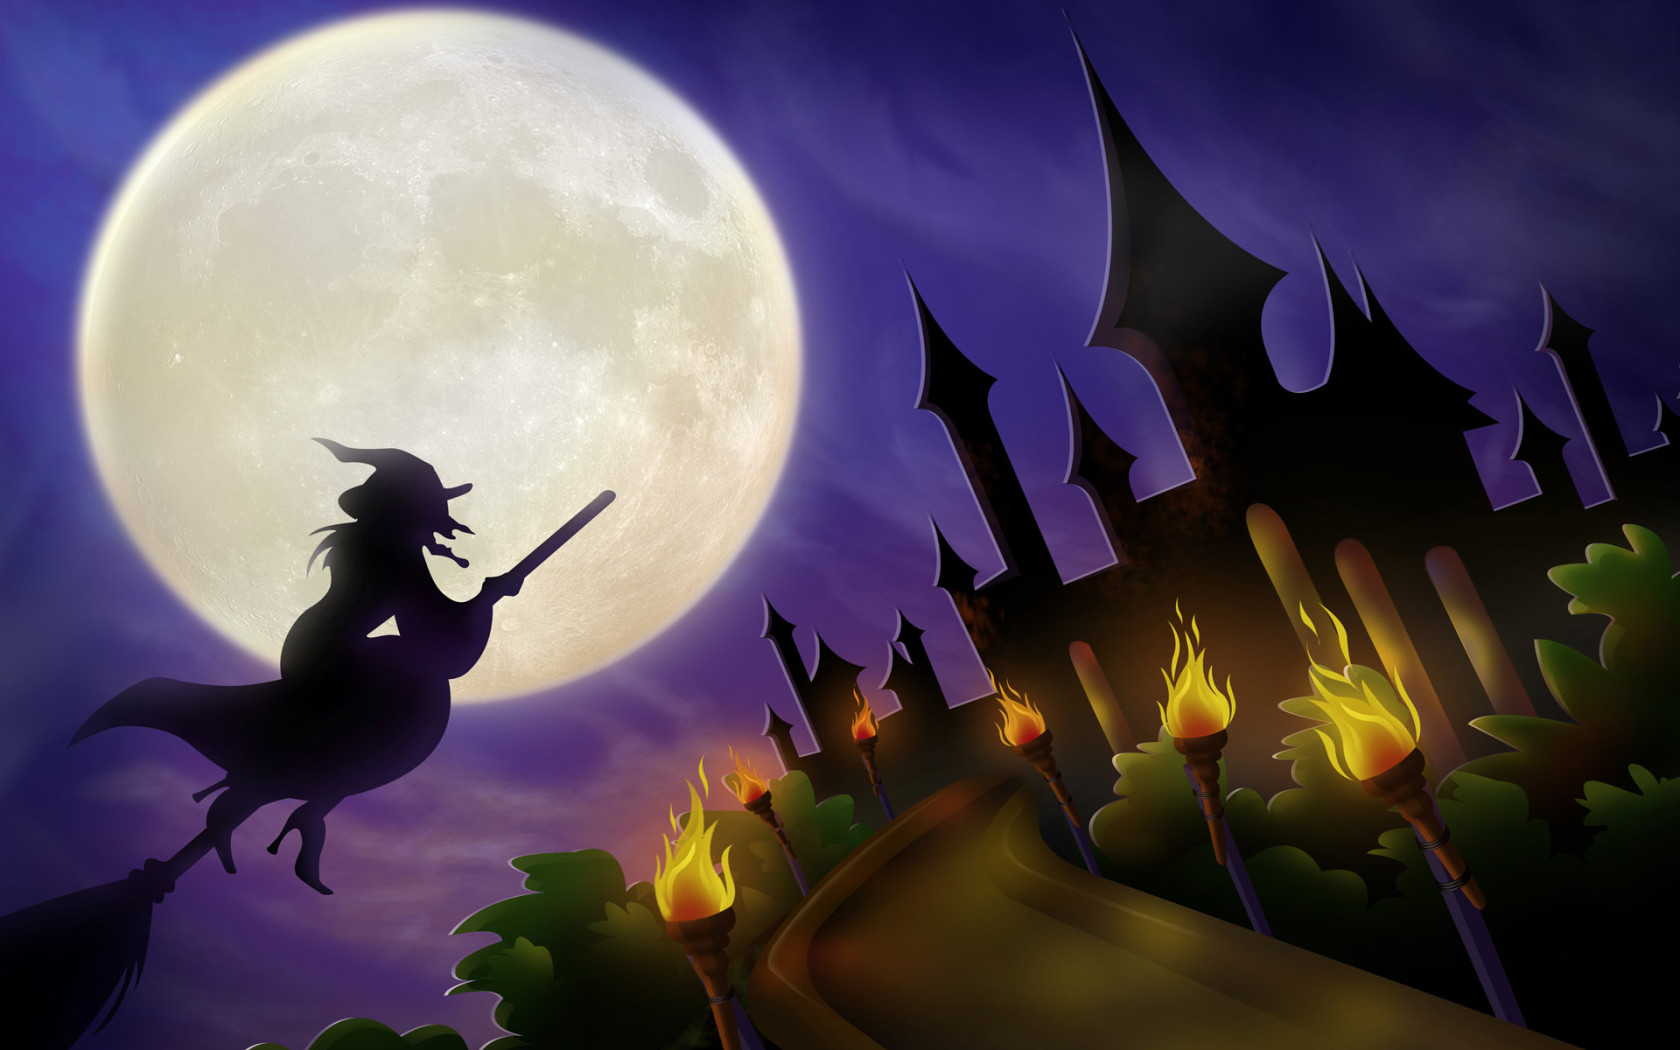 Previous, Holidays - Halloween - Castle witches / Halloween wallpaper